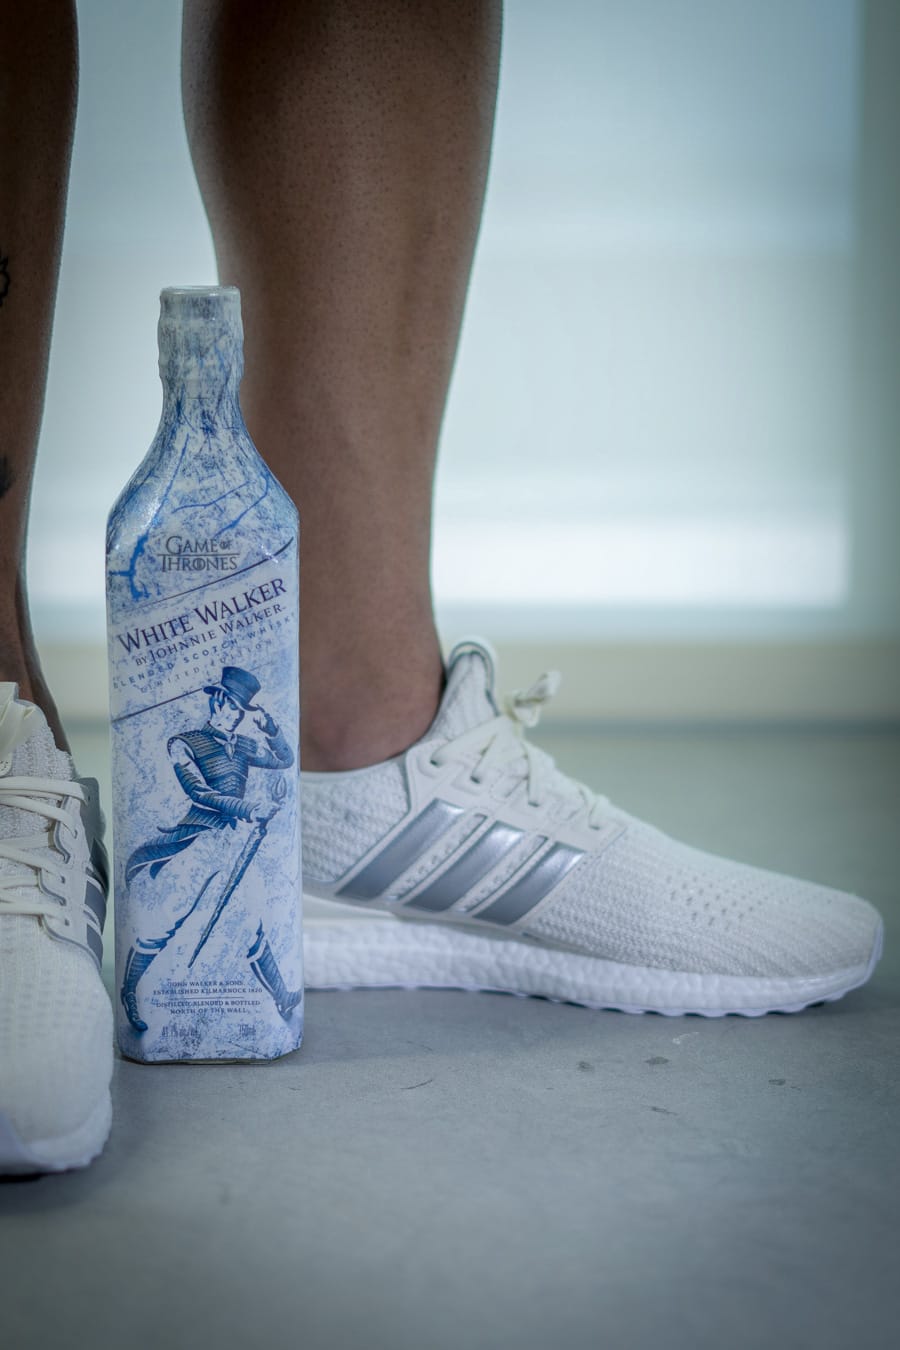 Game of Thrones x adidas UltraBOOST On 